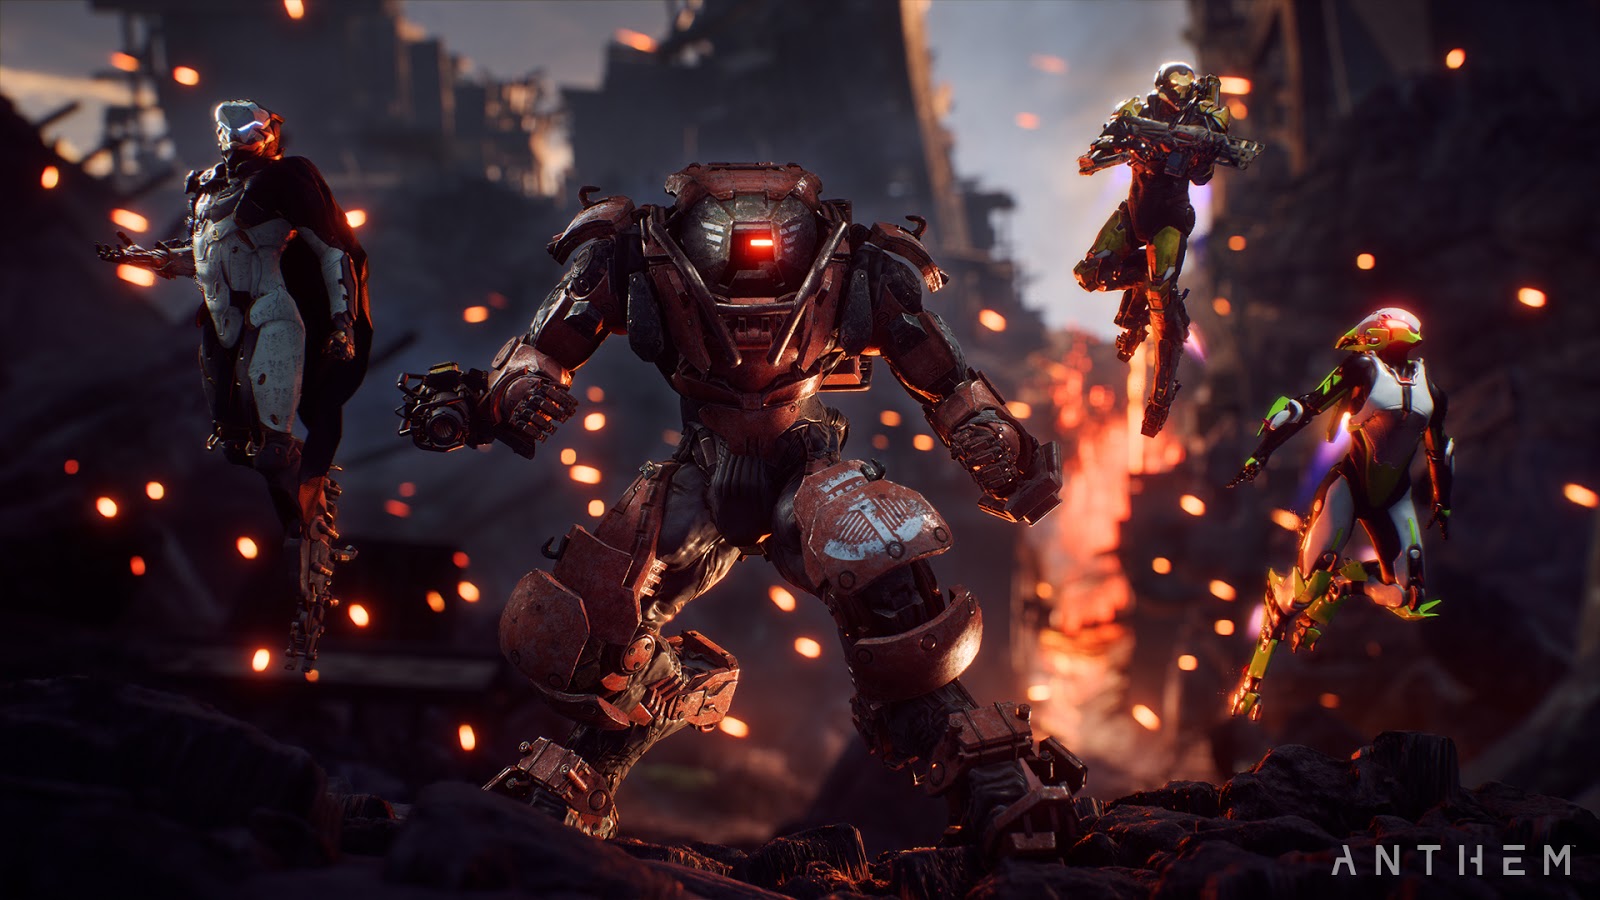 Pax West New Anthem Gameplay Trailer Demo Date Revealed